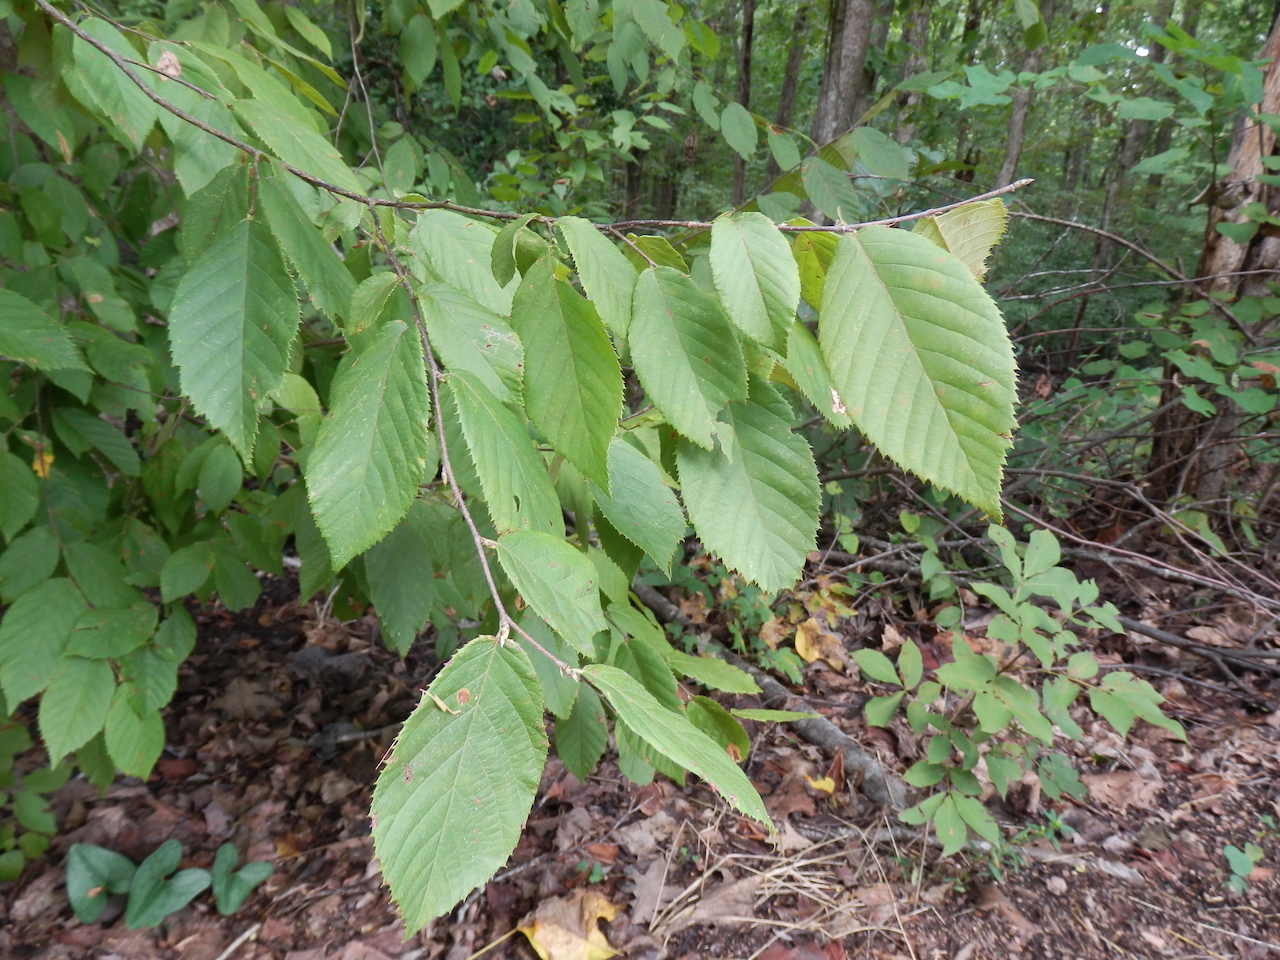 The Scientific Name is Ostrya virginiana. You will likely hear them called American Hop-hornbeam, Eastern  Hop Hornbeam. This picture shows the Sharply serrated leaves of Ostrya virginiana